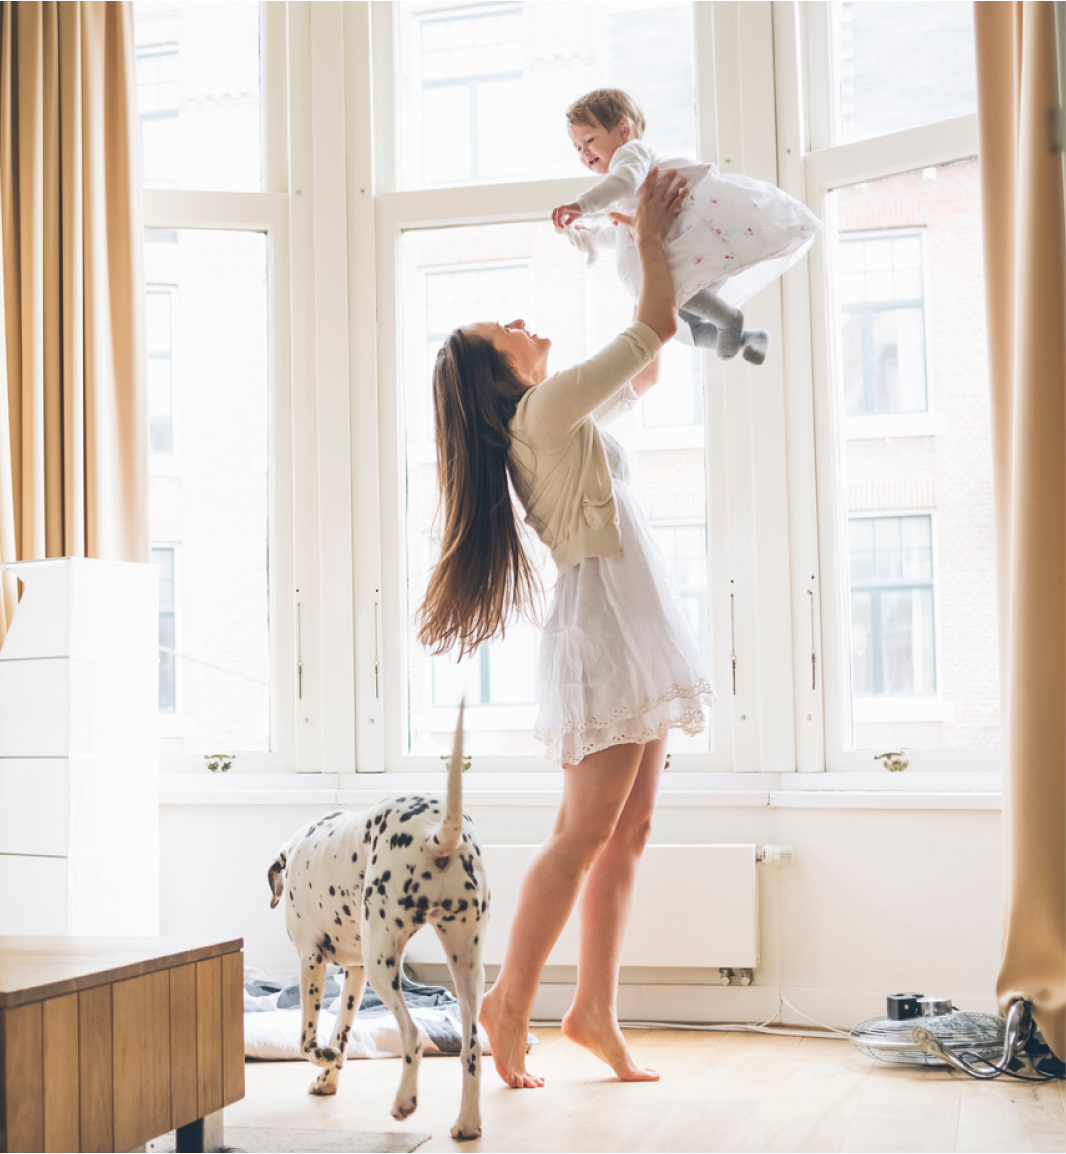 Mom playing with baby | HŌM Wellness